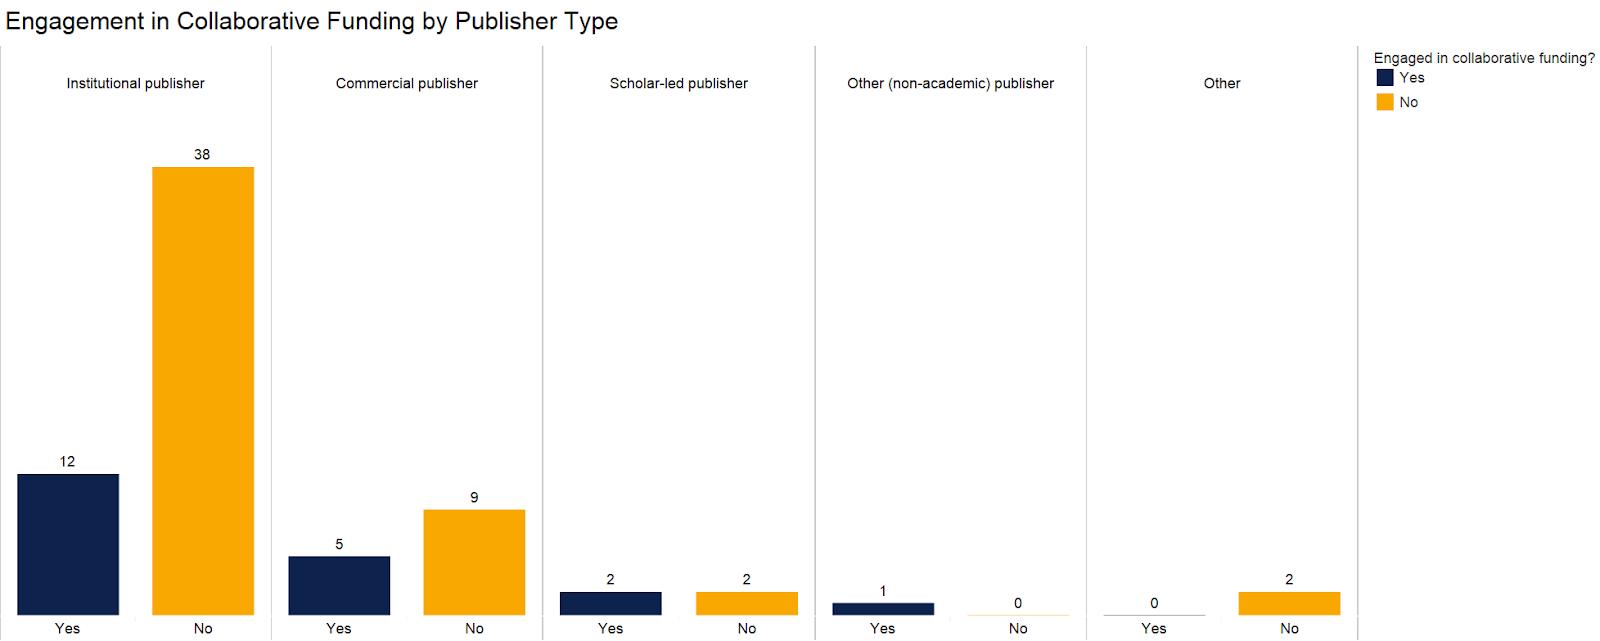 Figure showing that the majority of institutional and commercial publishers do not engage in collaborative funding